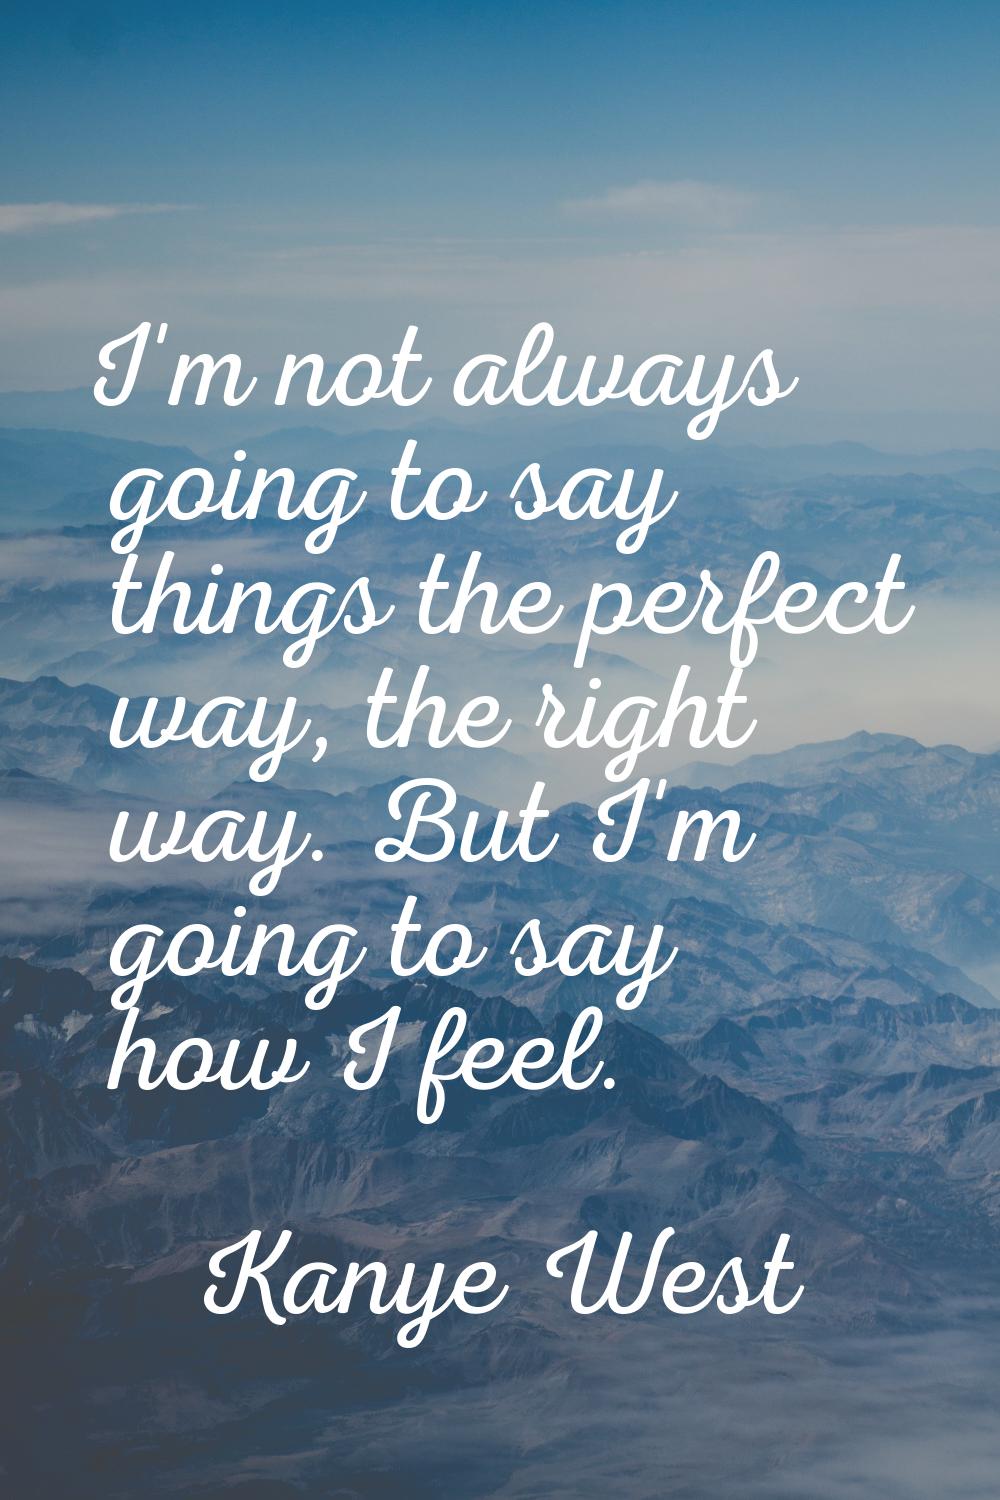 I'm not always going to say things the perfect way, the right way. But I'm going to say how I feel.